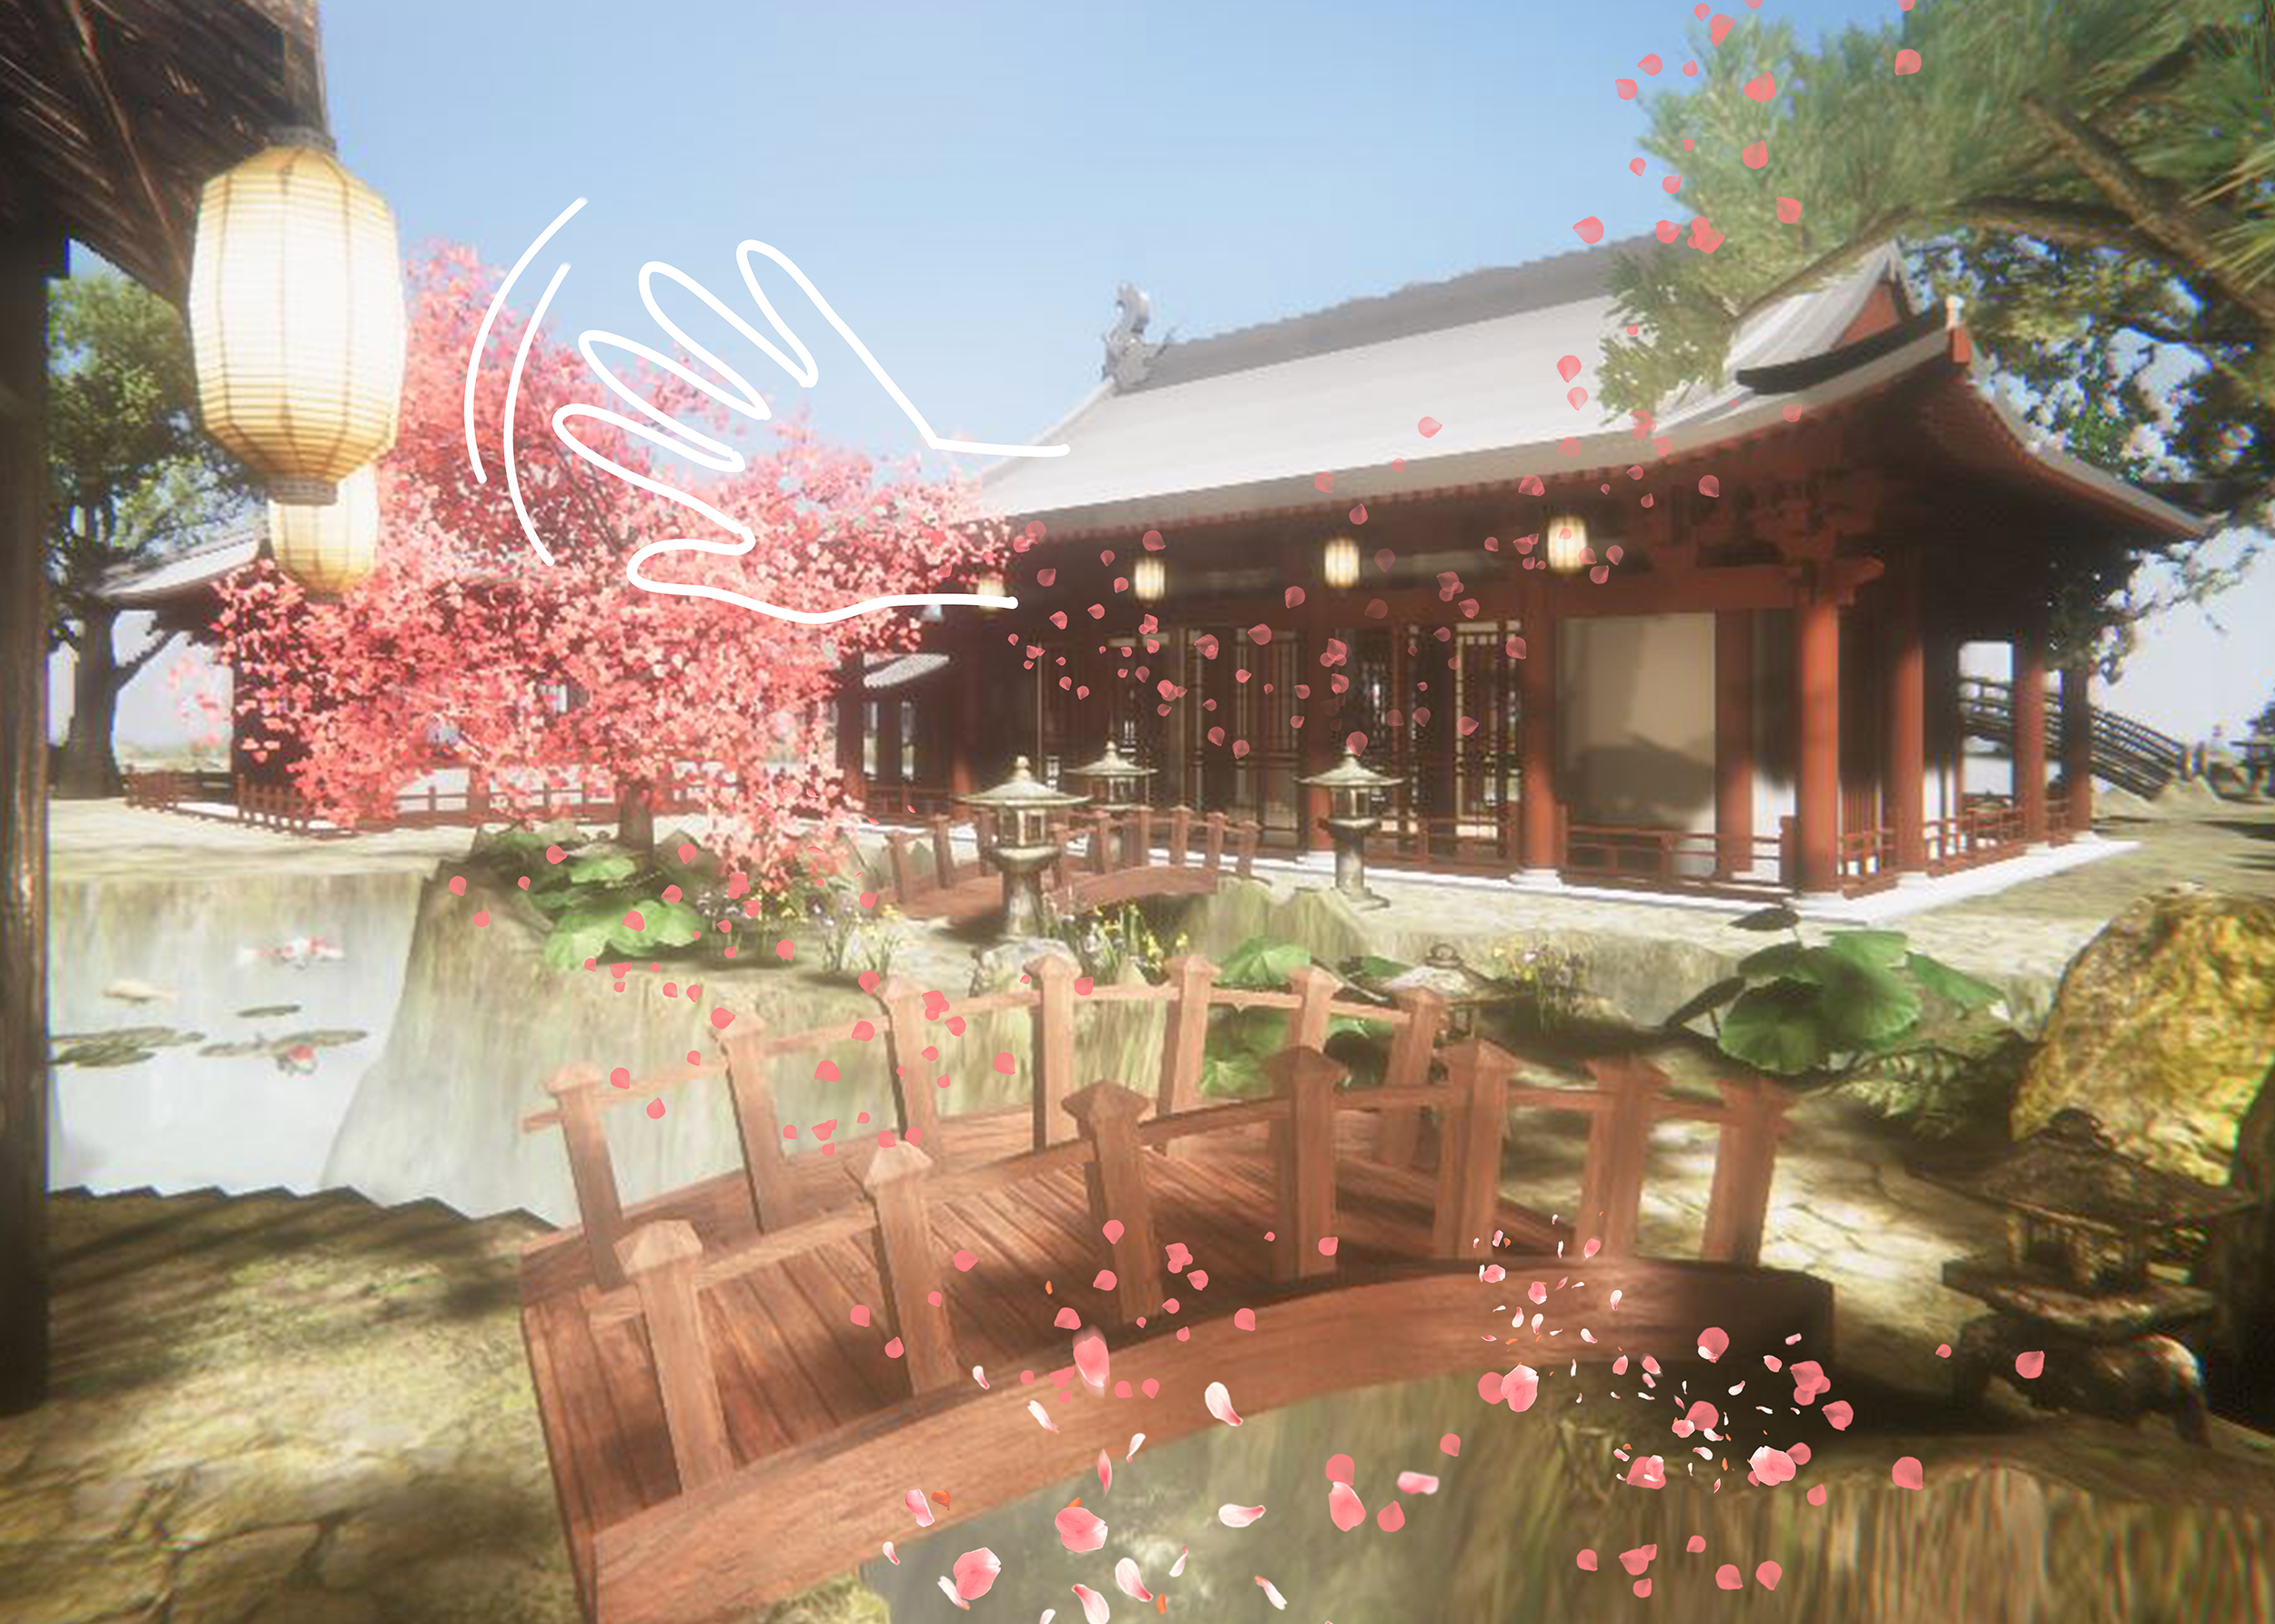 The player strengthens the wind by shaking causing the cherry petals to fall.